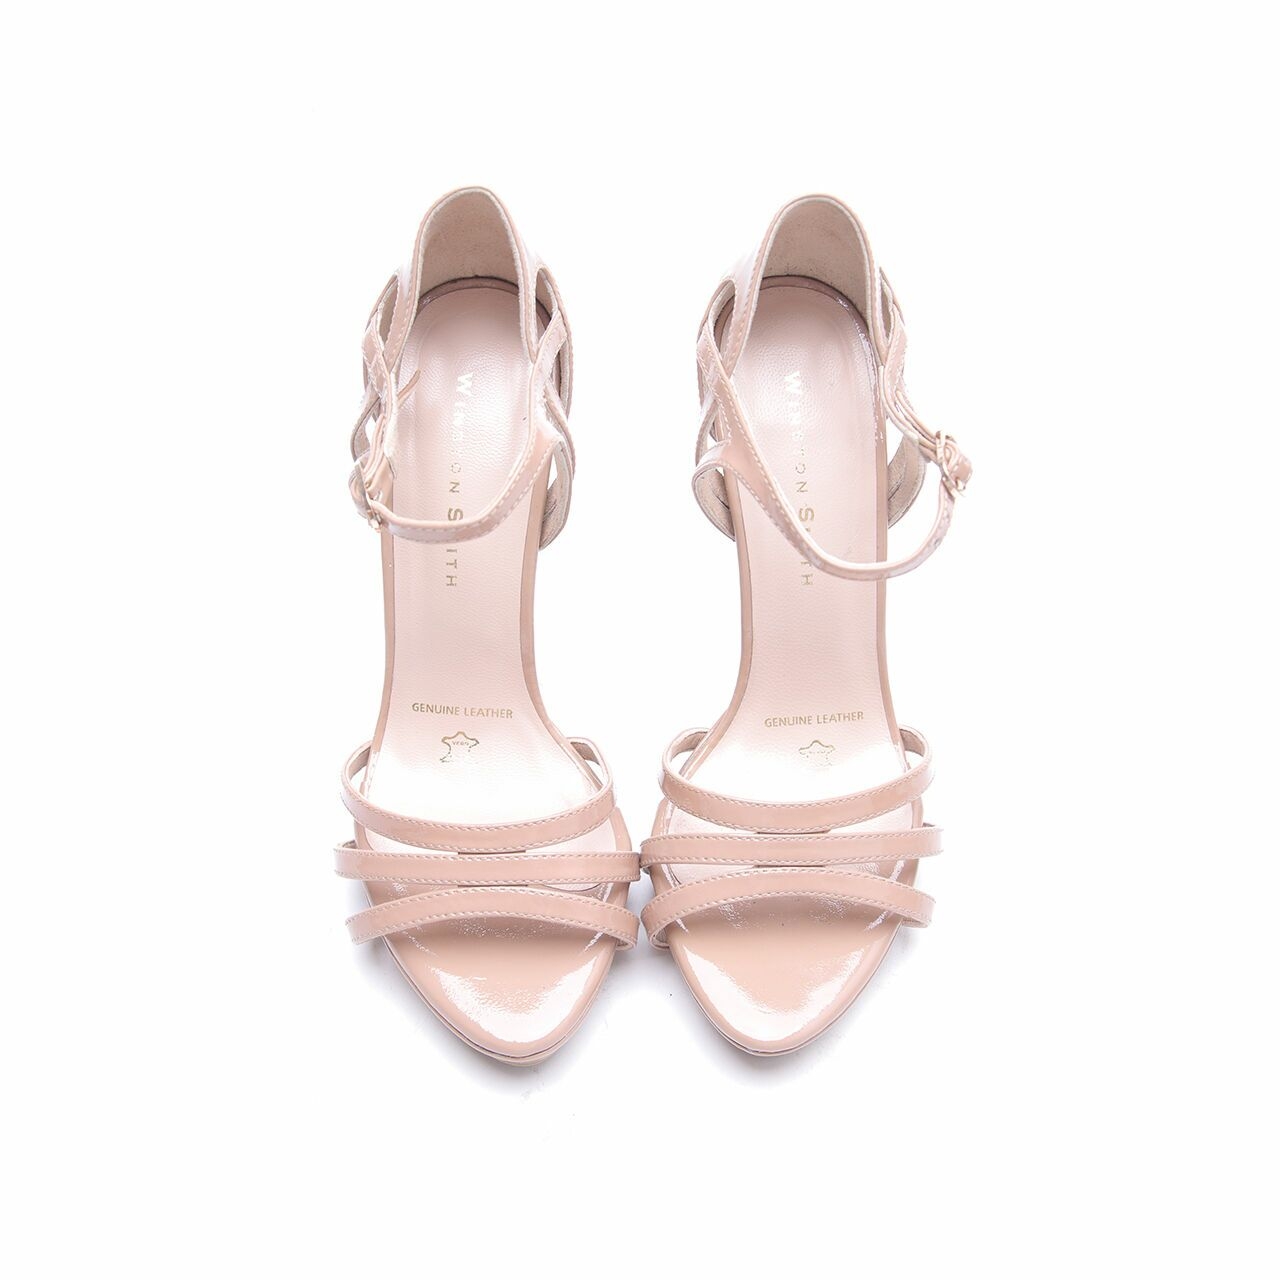 Winston Smith Nude Patent Leather Heels